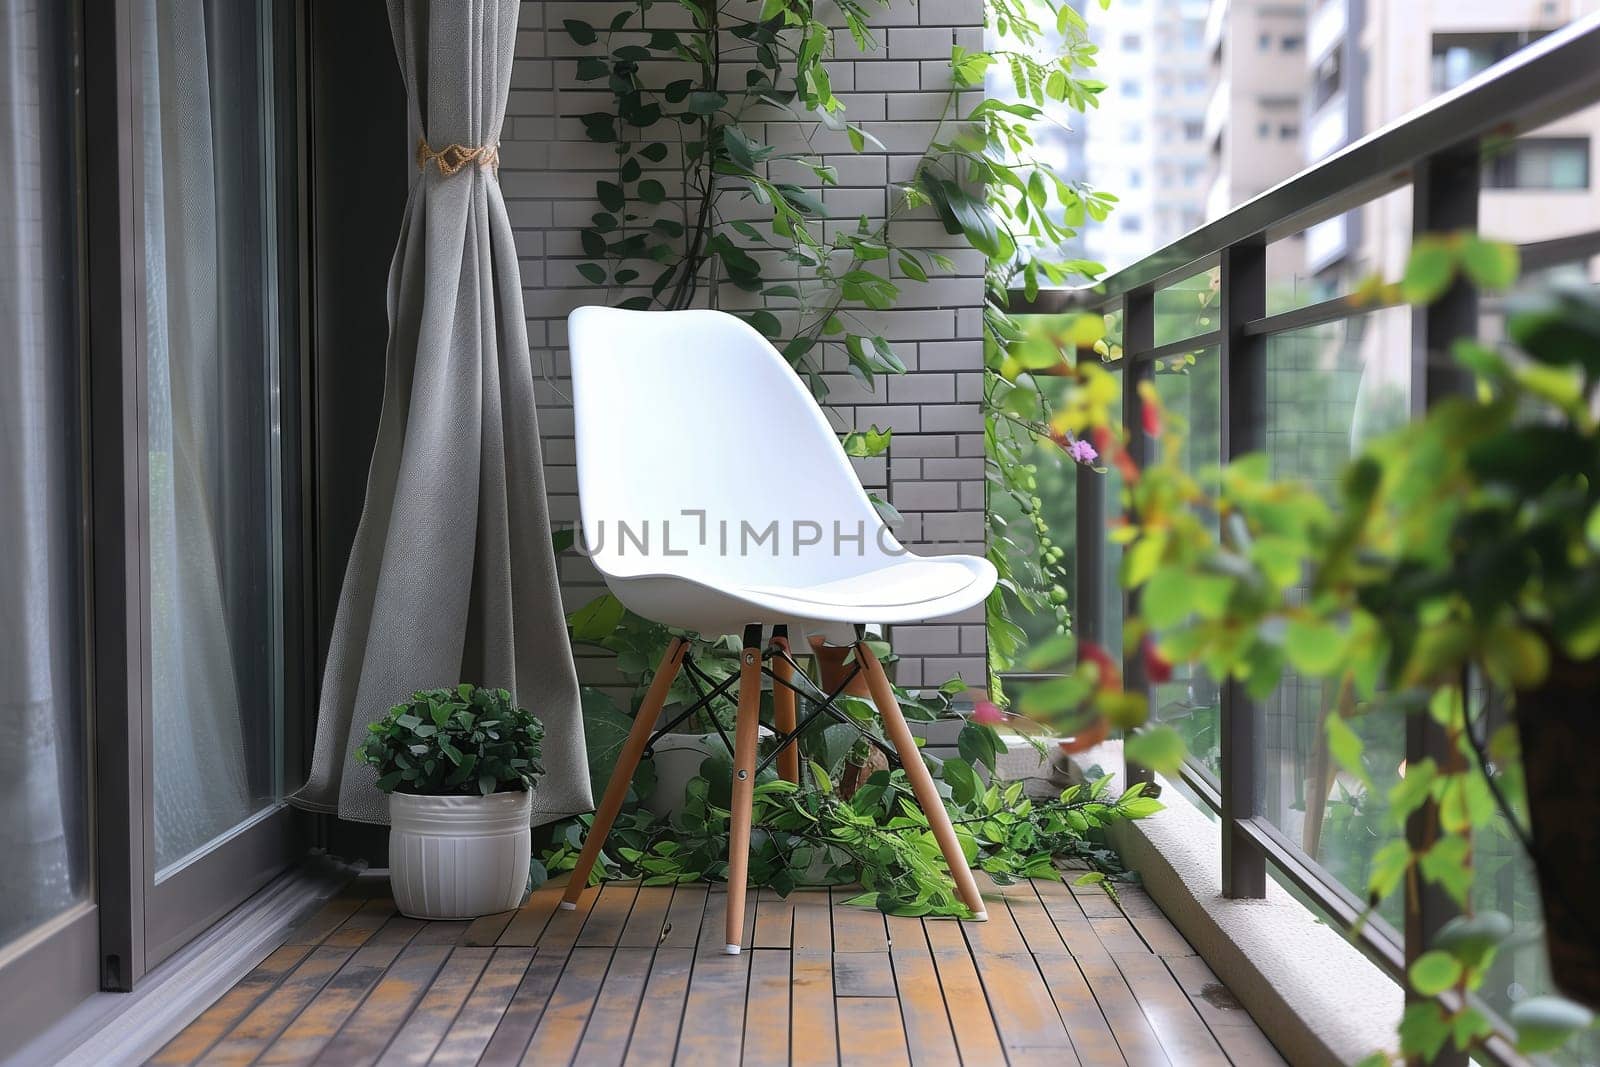 A white chair and a potted plant are placed on a balcony overlooking a grassy yard. The wooden fixture complements the interior design, providing a cozy spot to relax in the shade